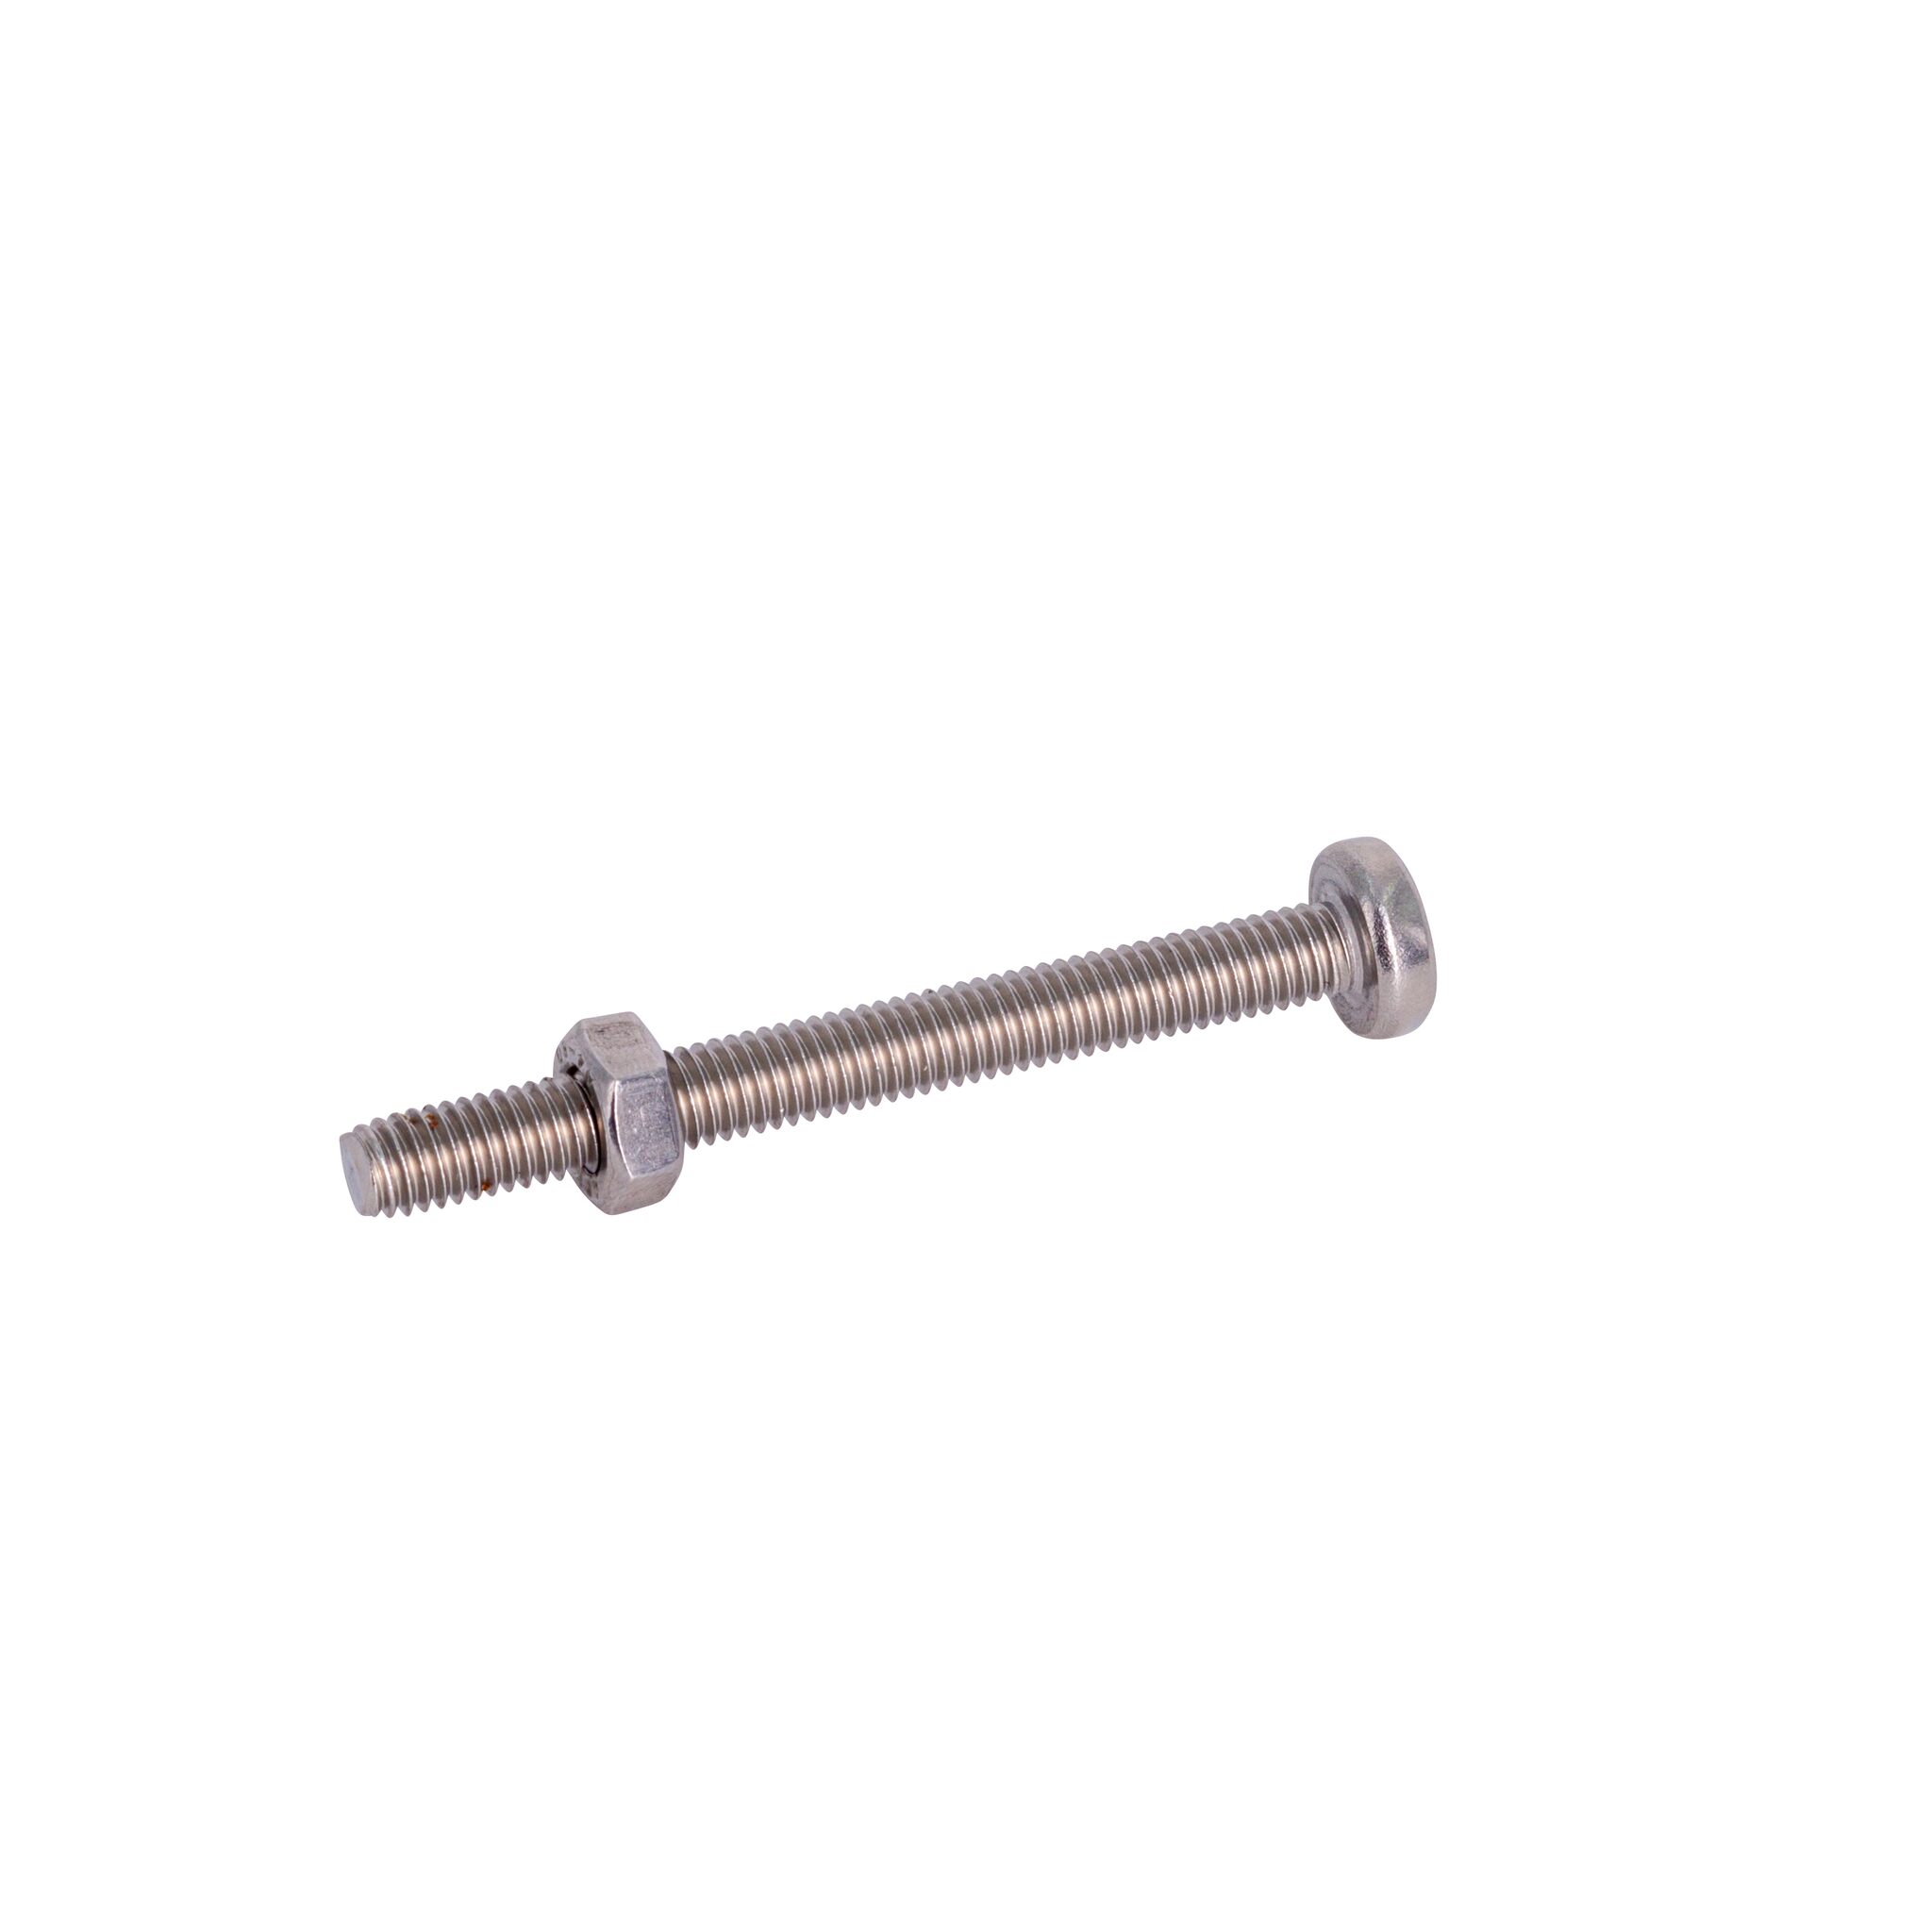 Pan head screw with nut (DIN 7985/934-A4)